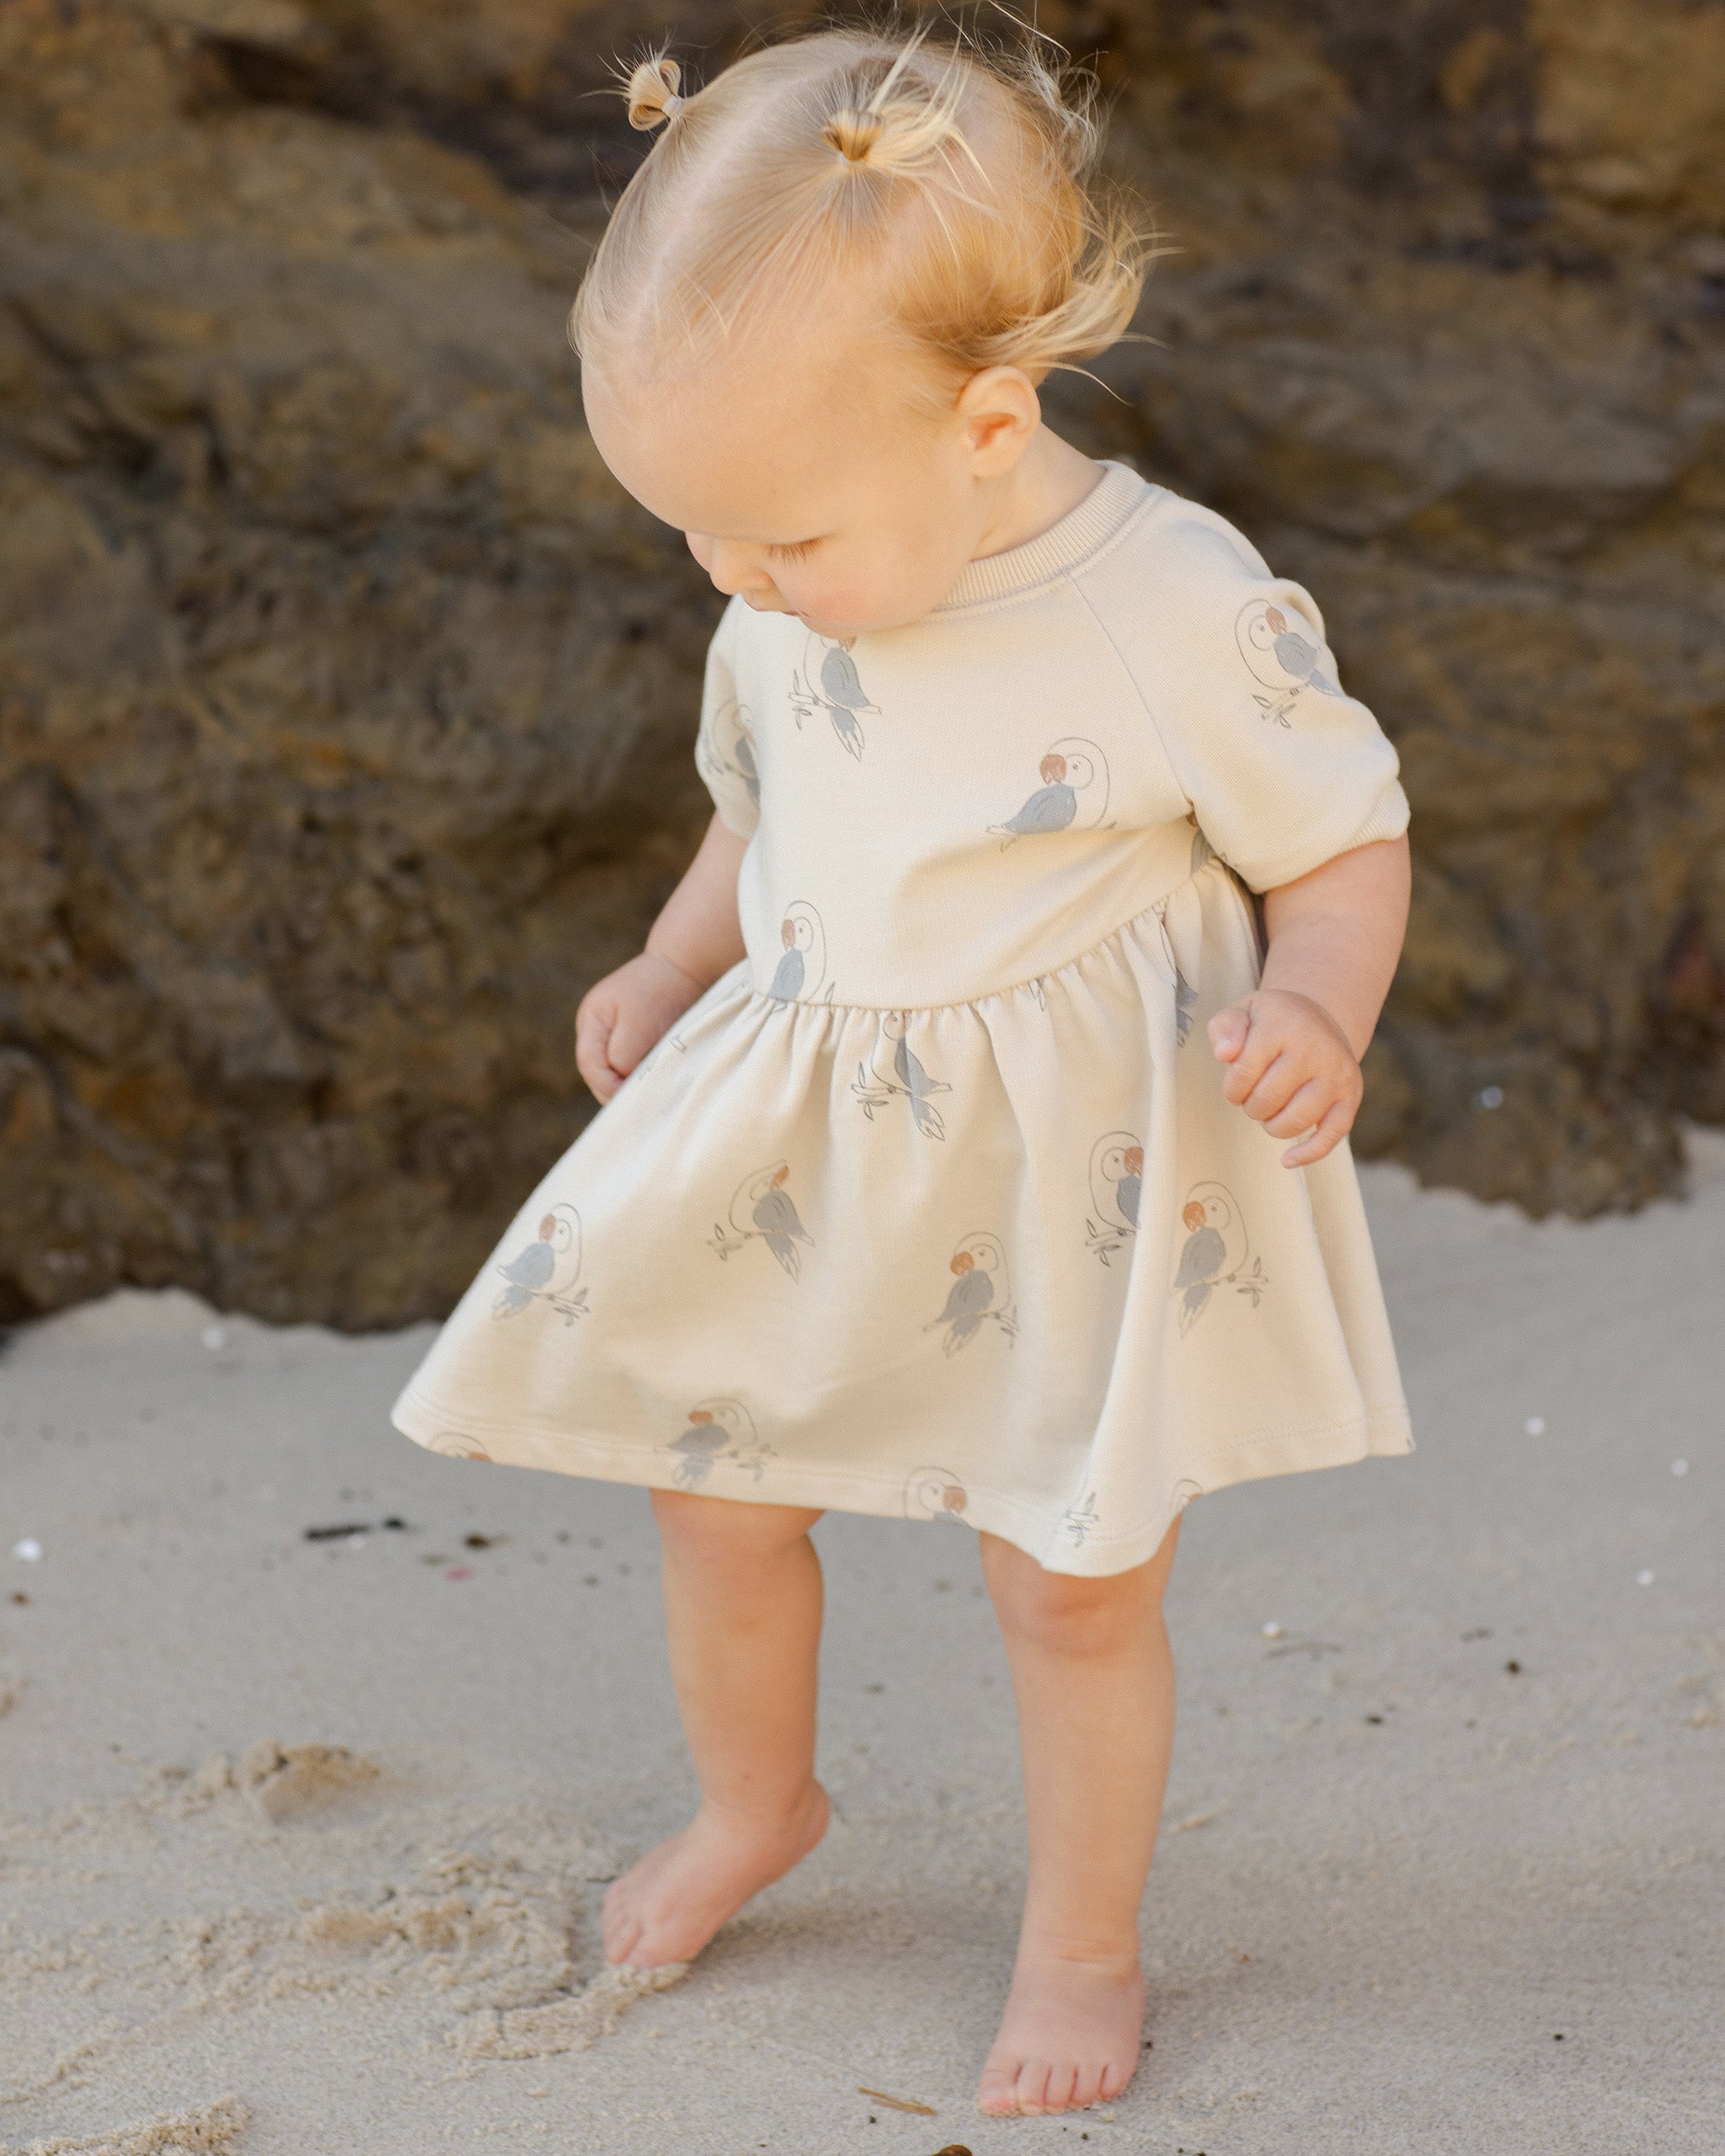 Raglan Dress || Parrots - Rylee + Cru | Kids Clothes | Trendy Baby Clothes | Modern Infant Outfits |